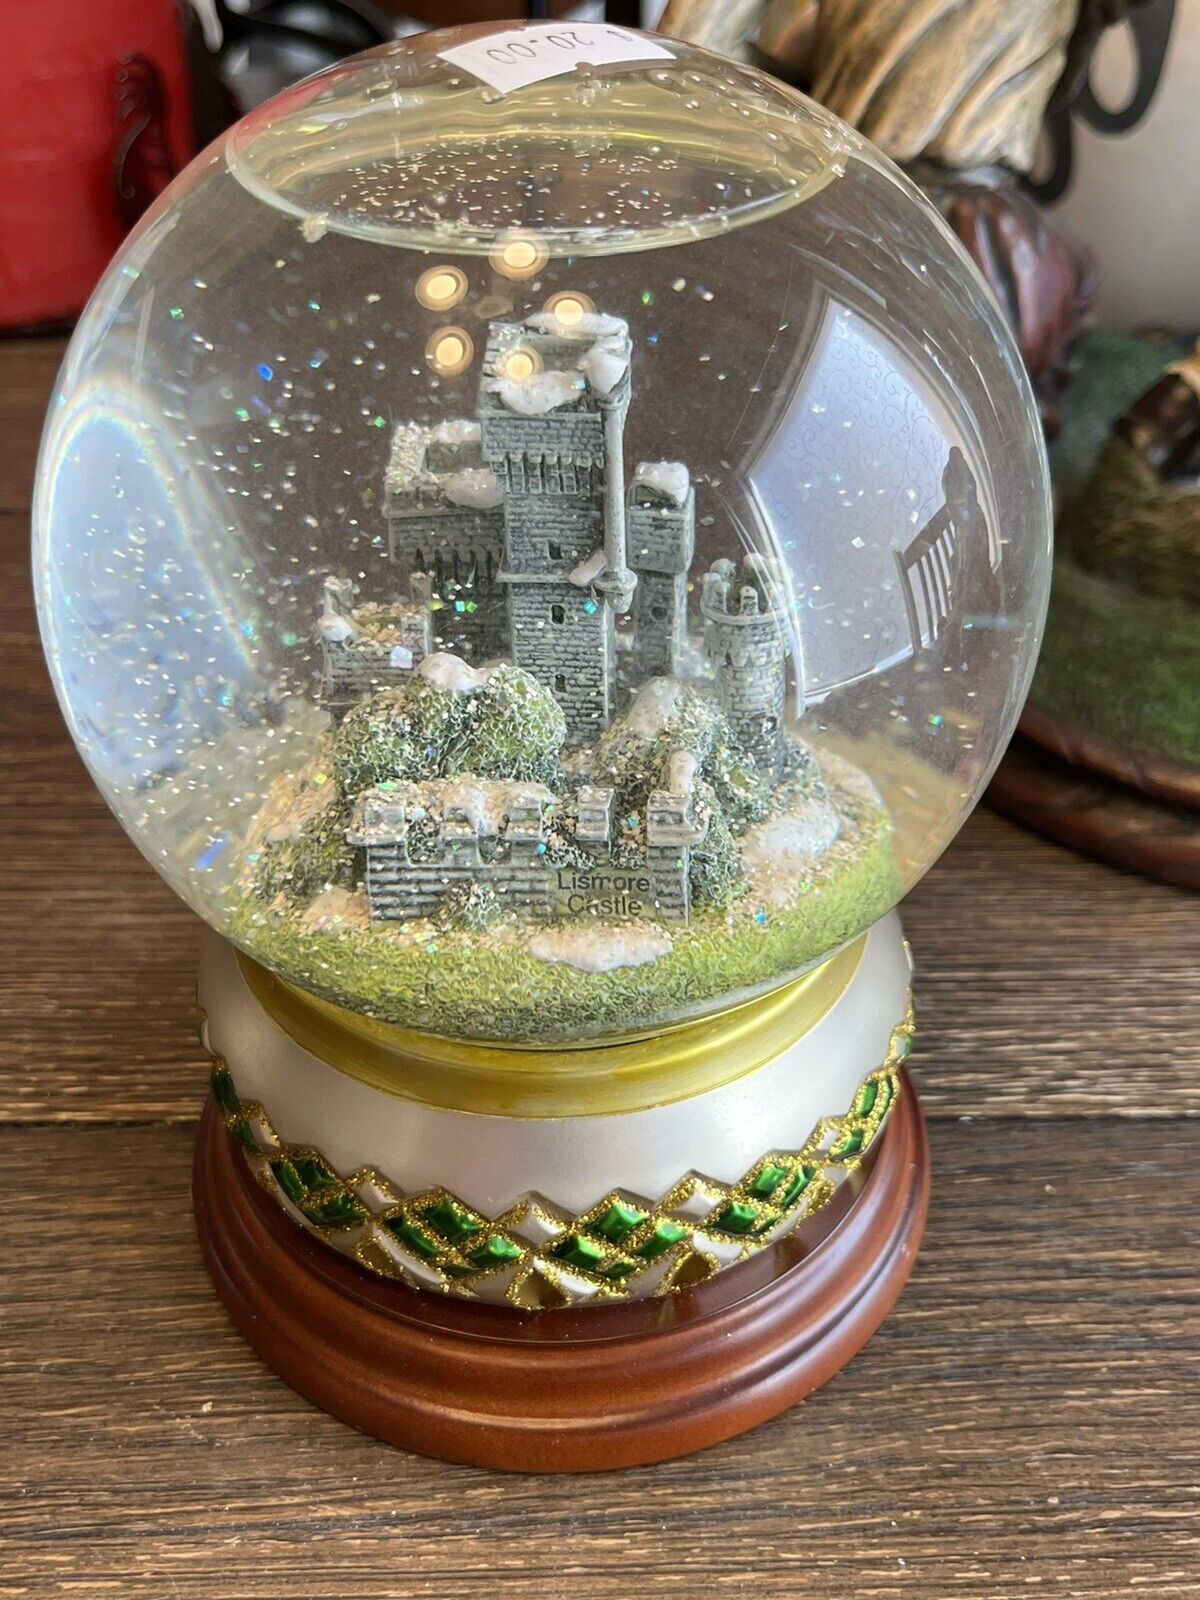 Limited Edition 2003 Waterford Holiday Heirloom Lismore Castle Musical Snowglobe